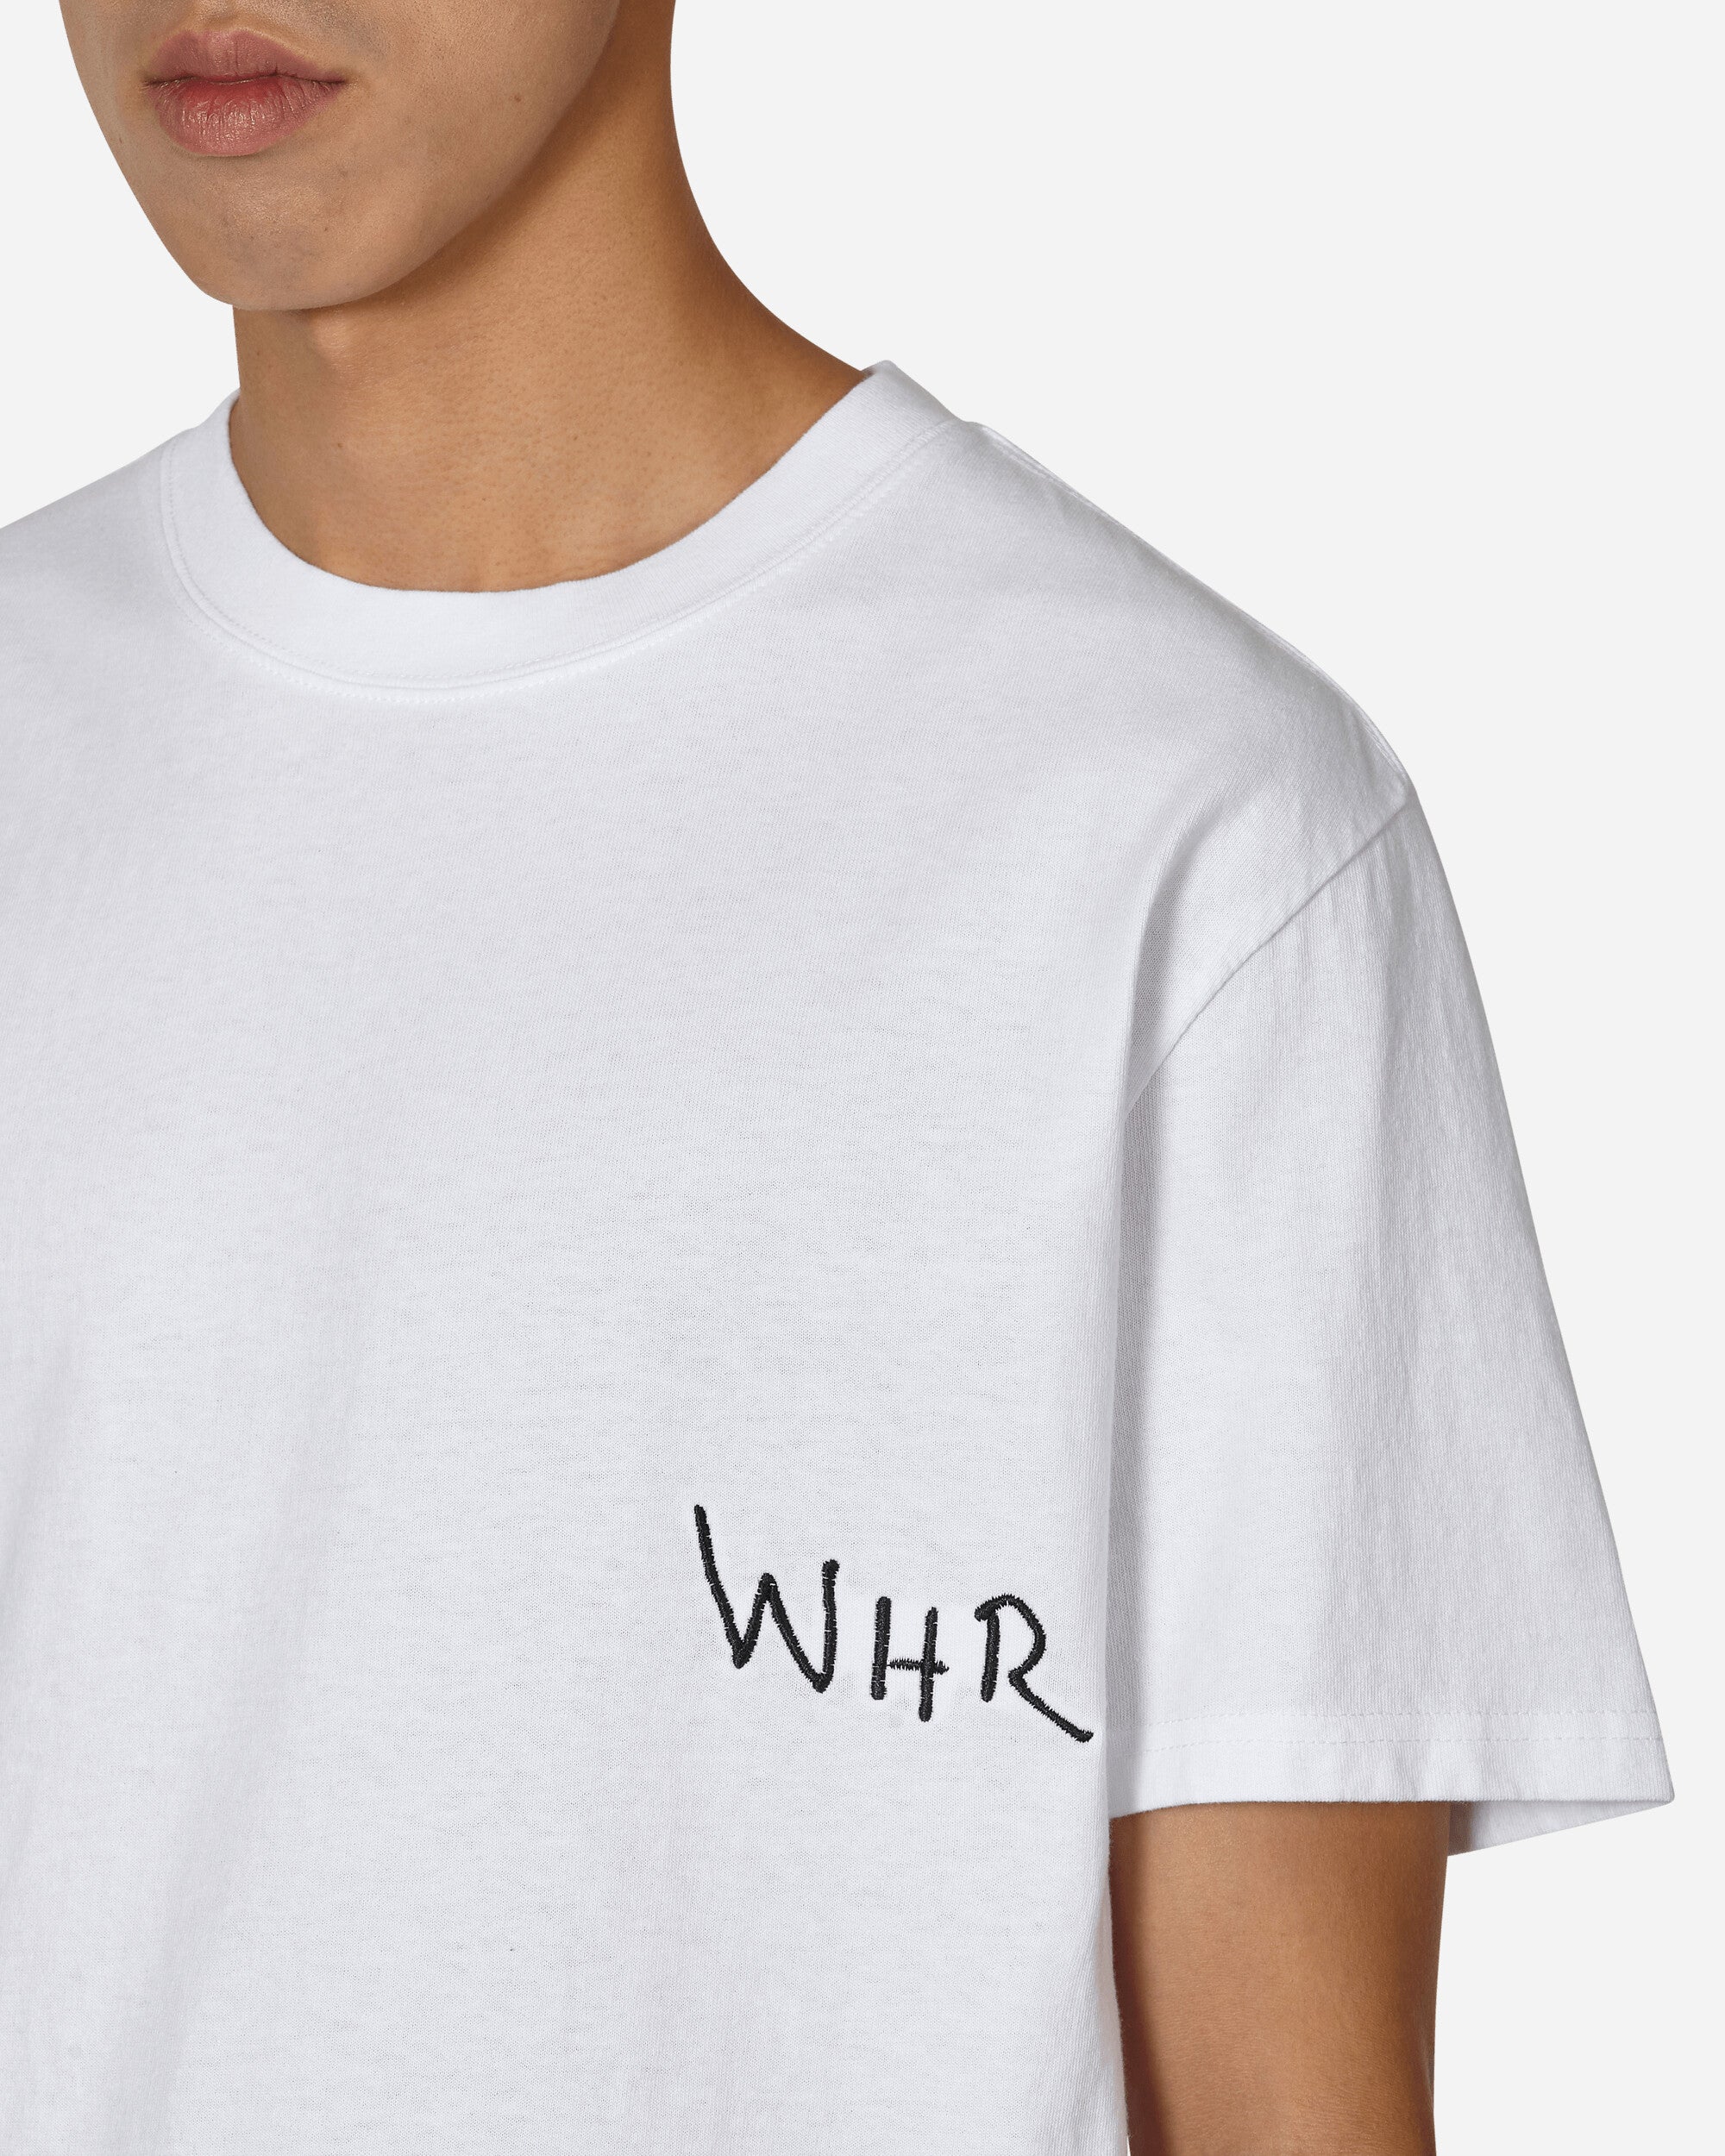 WESTERN HYDRODYNAMIC RESEARCH Embroidery S/S Tee White T-Shirts Shortsleeve MWHR23FW8002-M WHITE